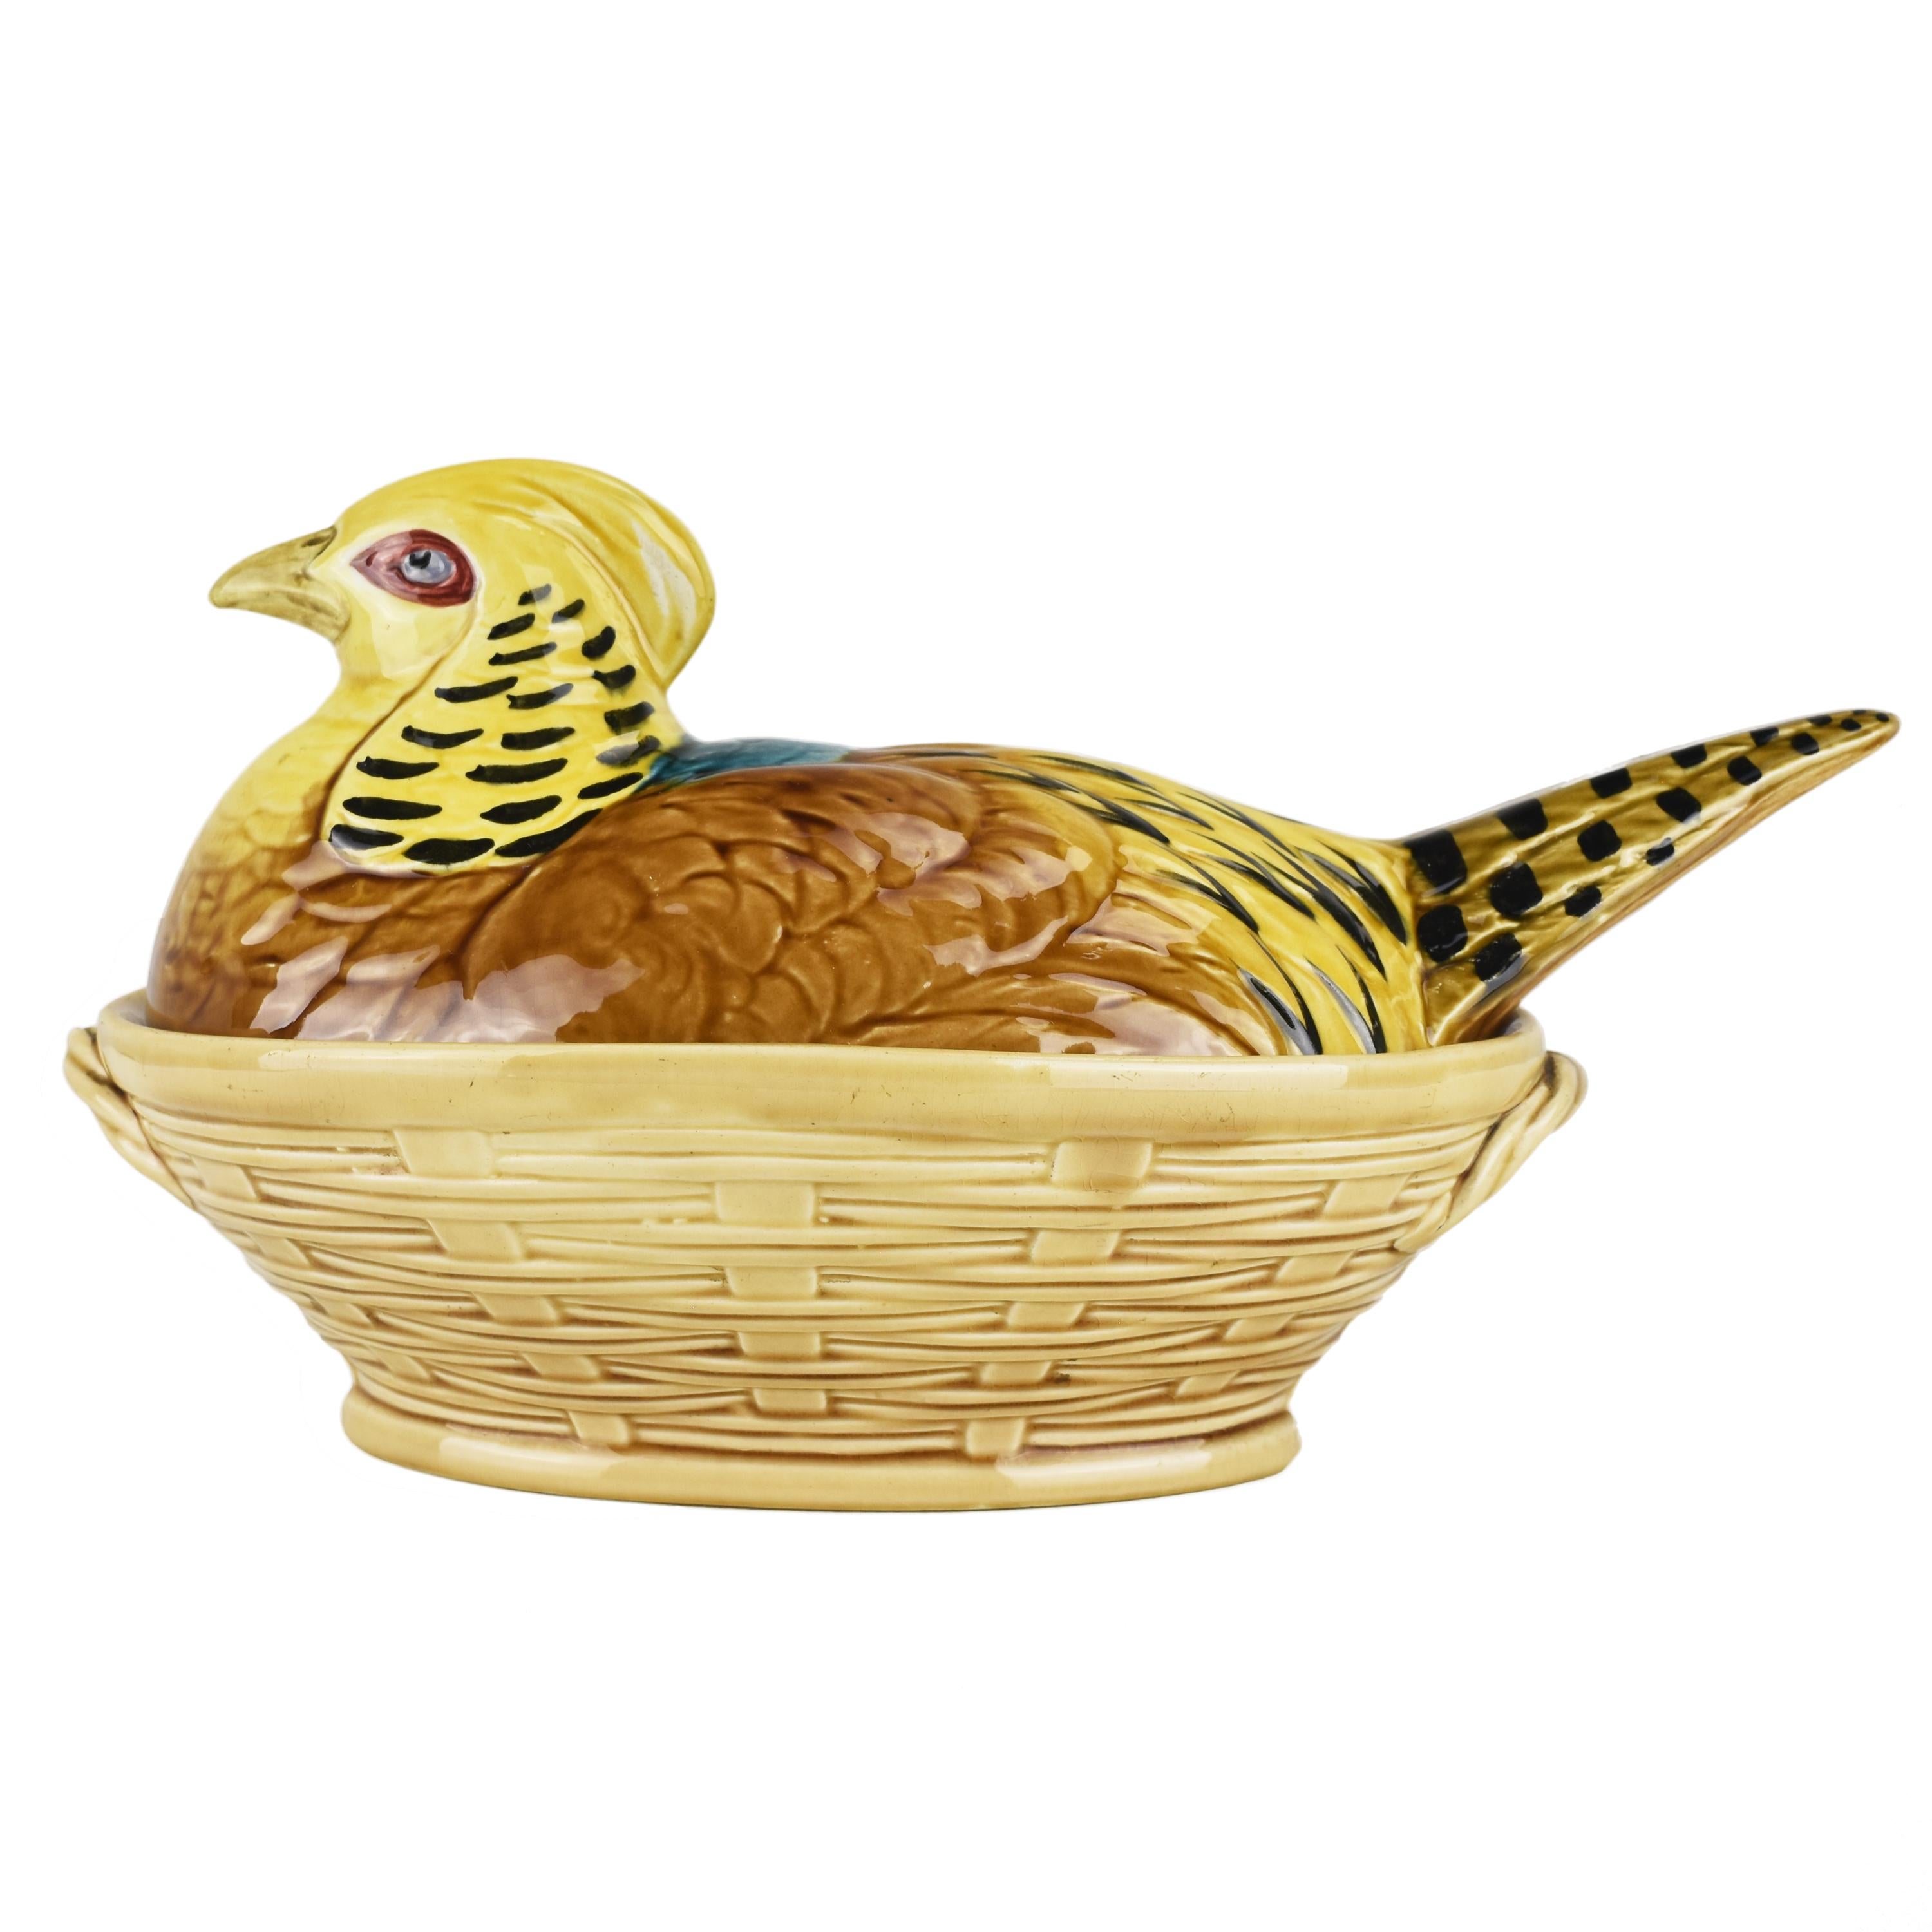 A hand-painted majolica lidded jar / box or tureen in the shape of a pheasant hen sitting on a basket, made by Sarreguemines around 1900. This beautiful and antique piece is made of hand-painted majolica, a type of earthenware known for its vibrant